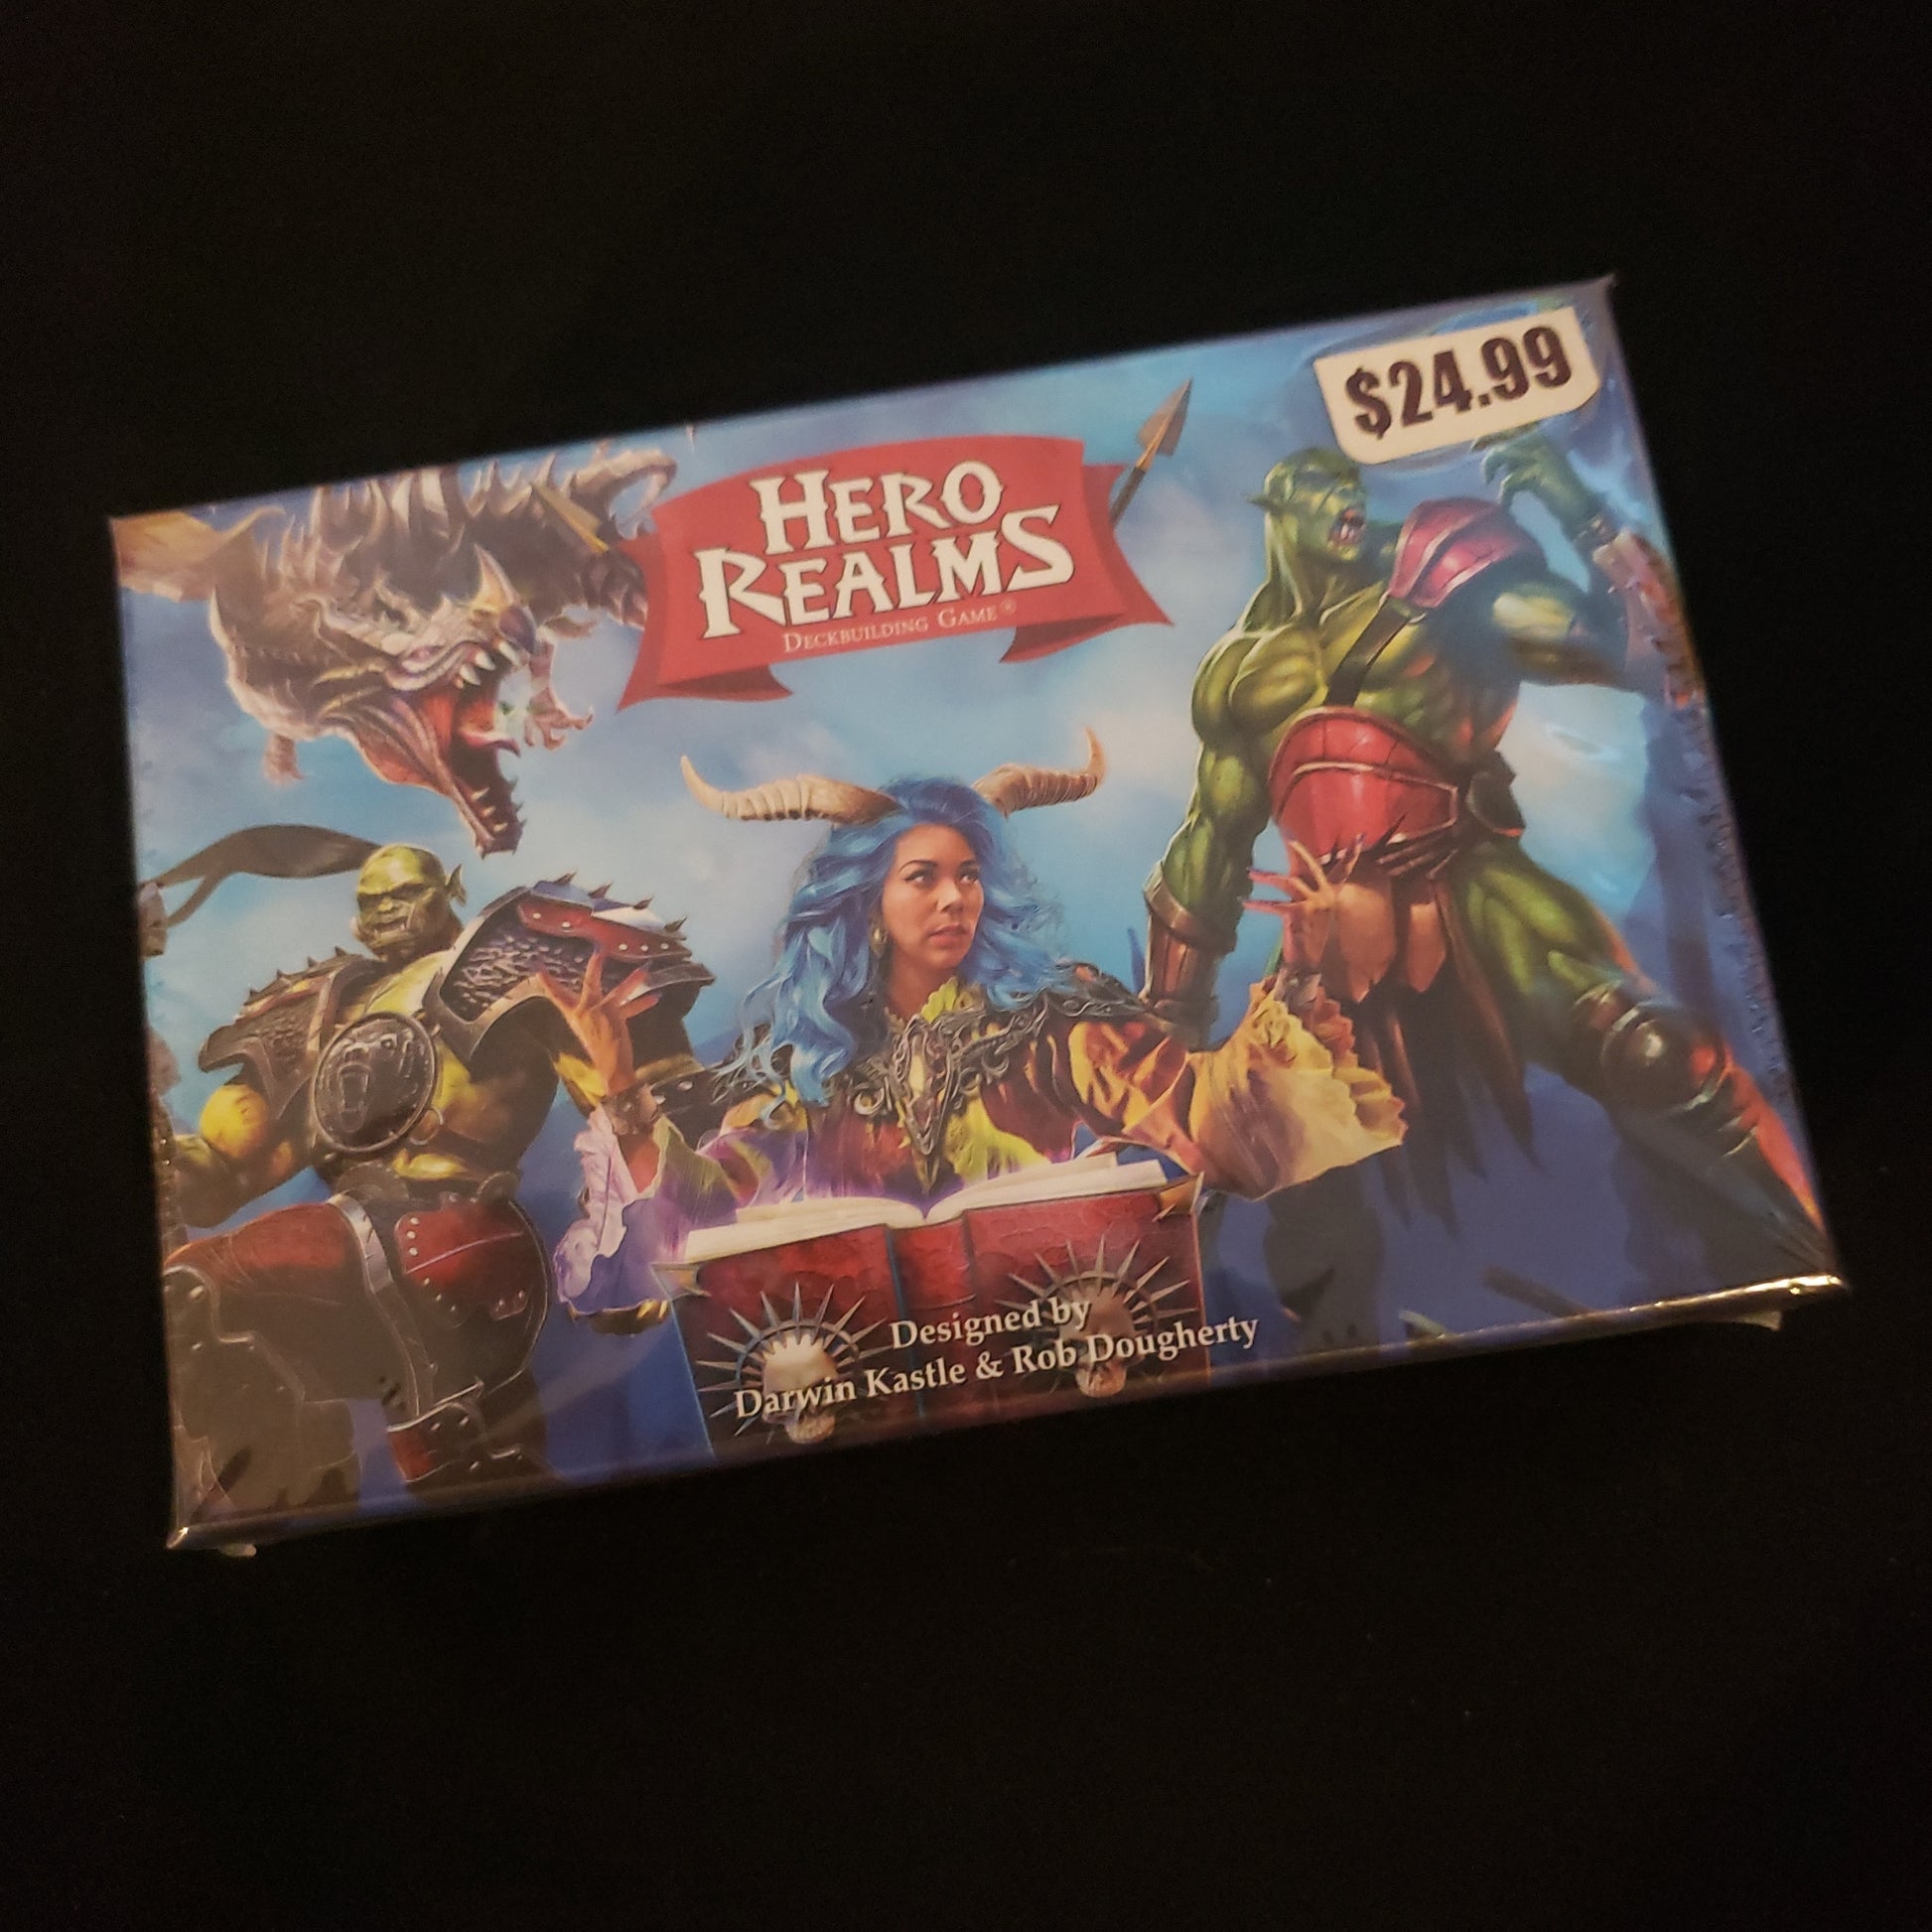 Image shows the front cover of the box of the Hero Realms card game